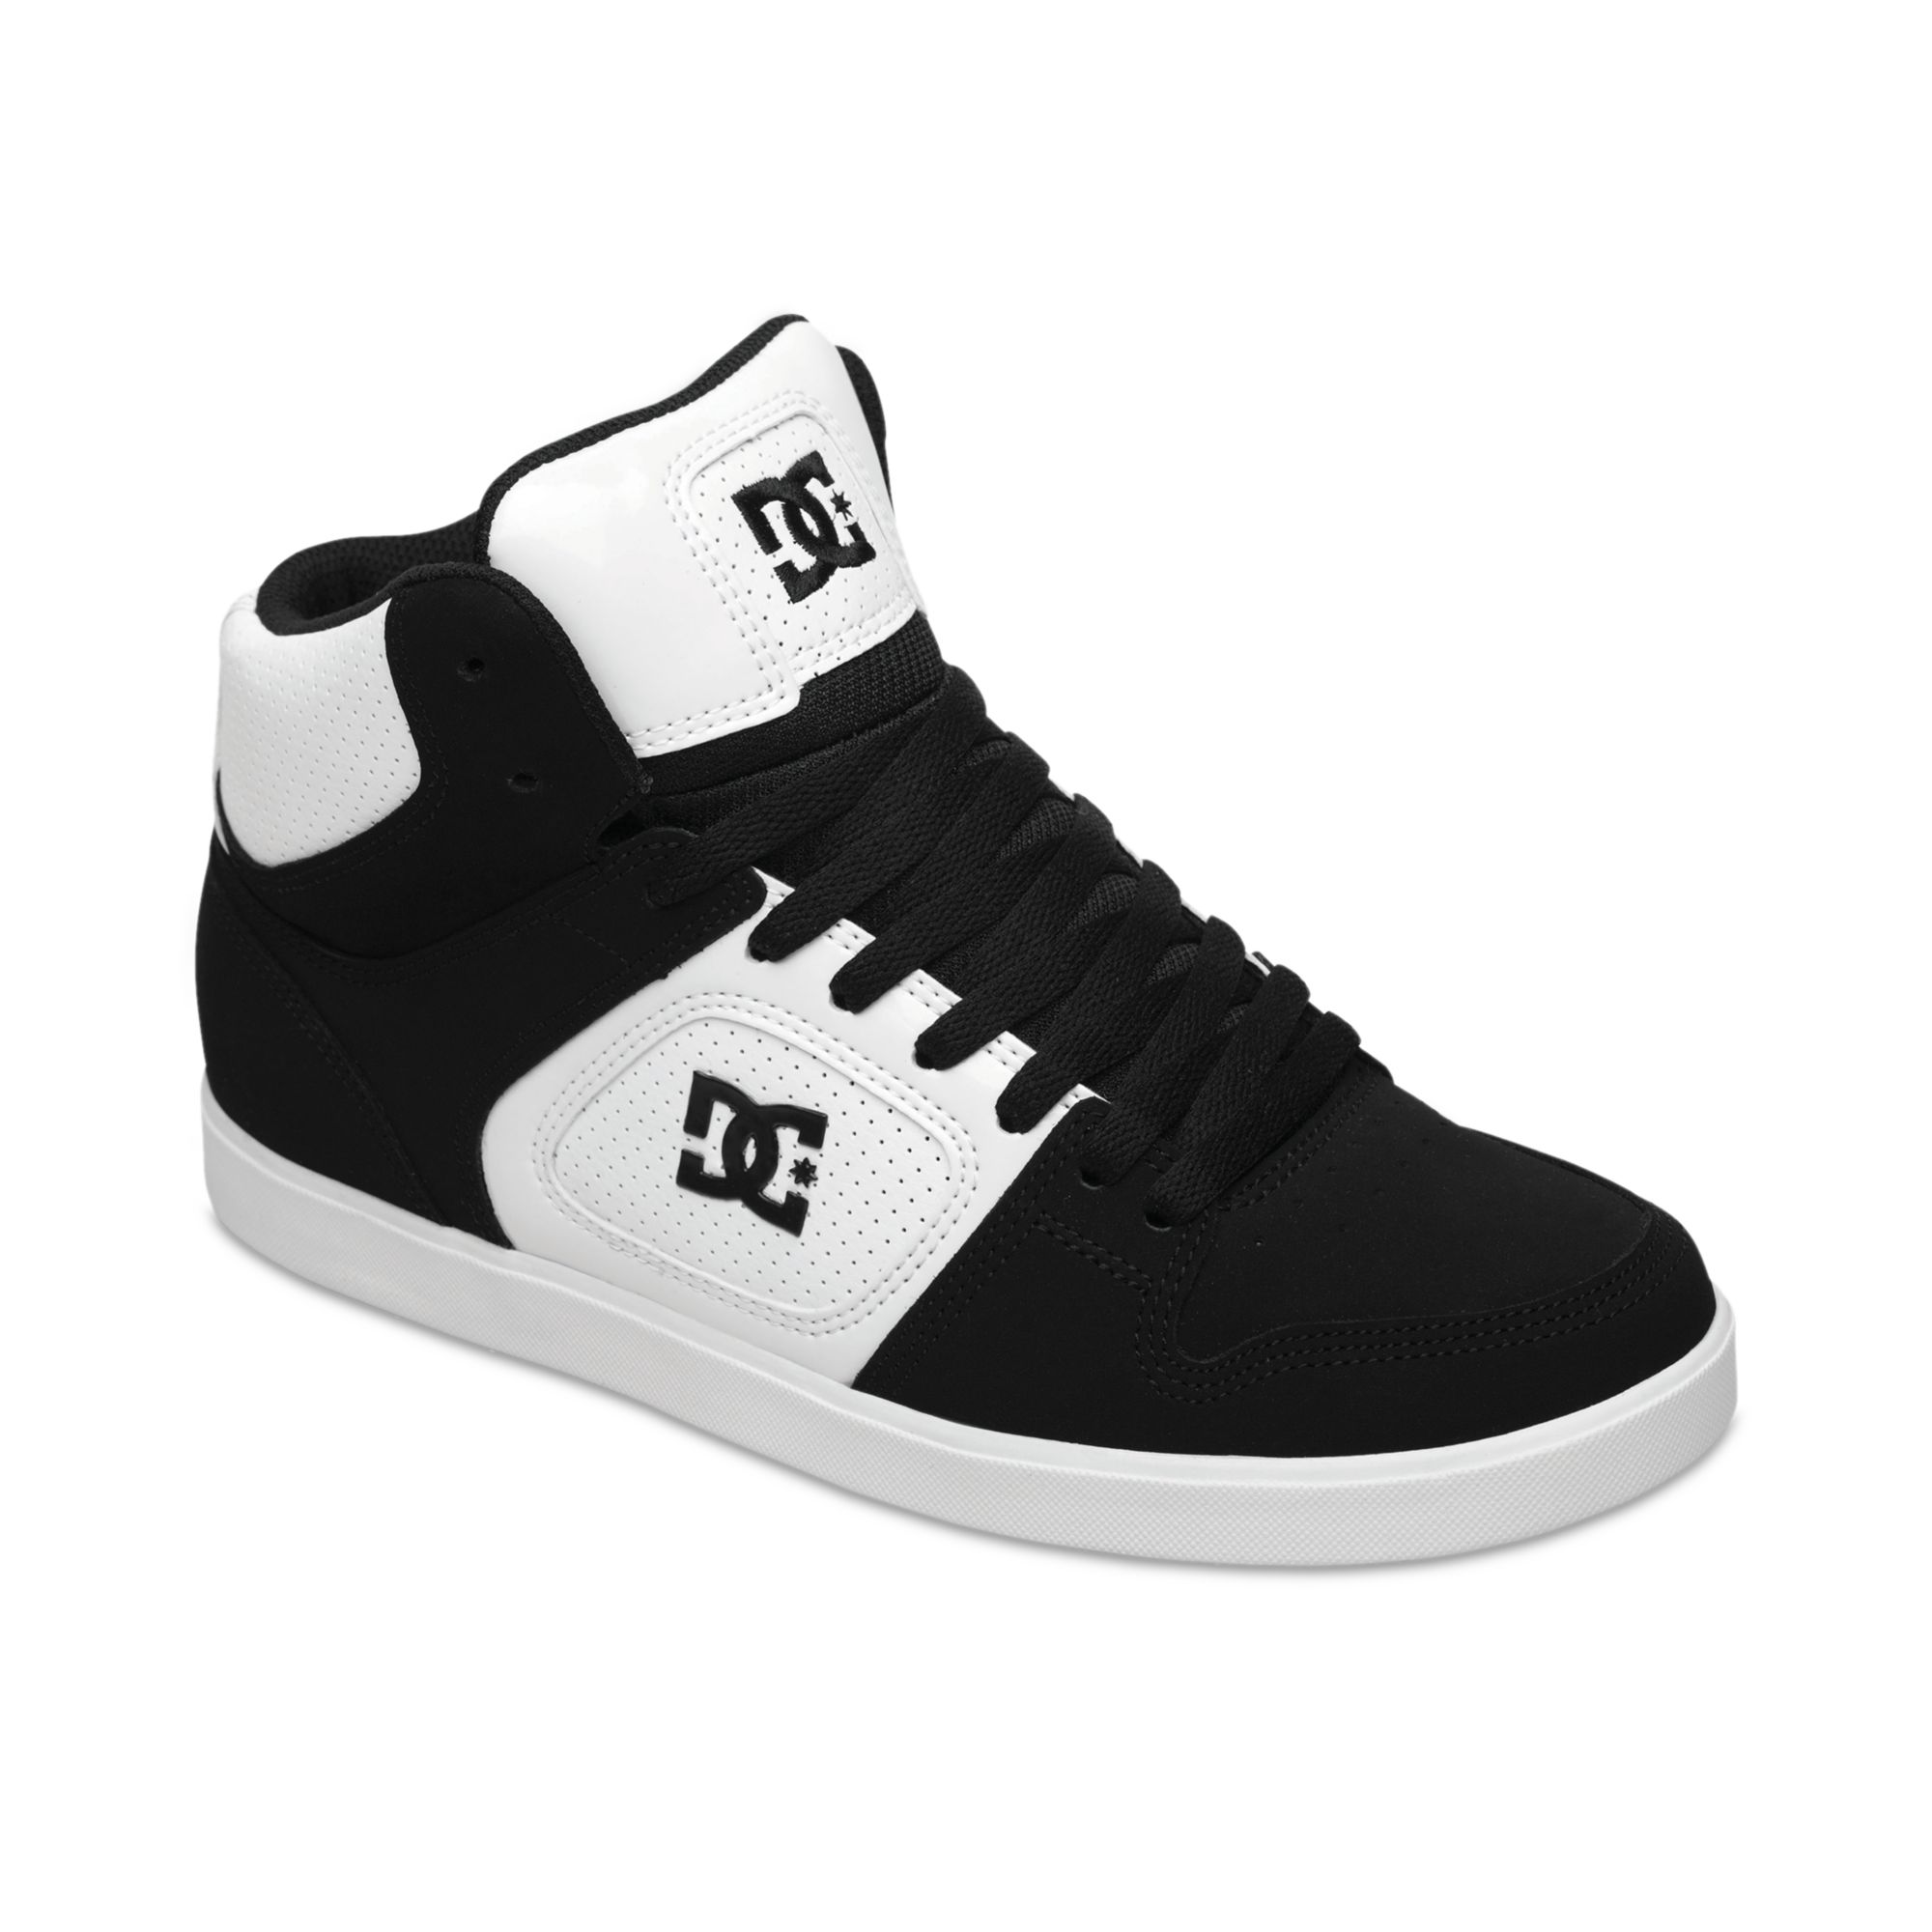 Lyst Dc  Shoes  Union Hi Sneakers  in Black for Men